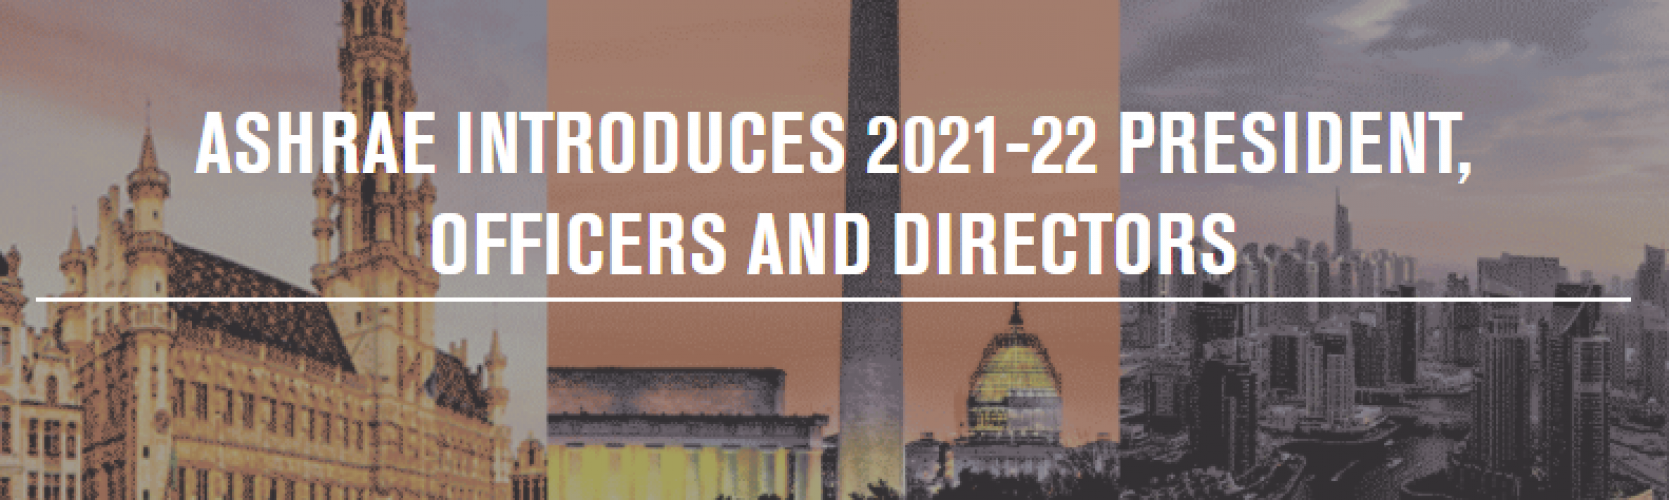 ashrae-introduces-2021-22-president,-officers-and-directors